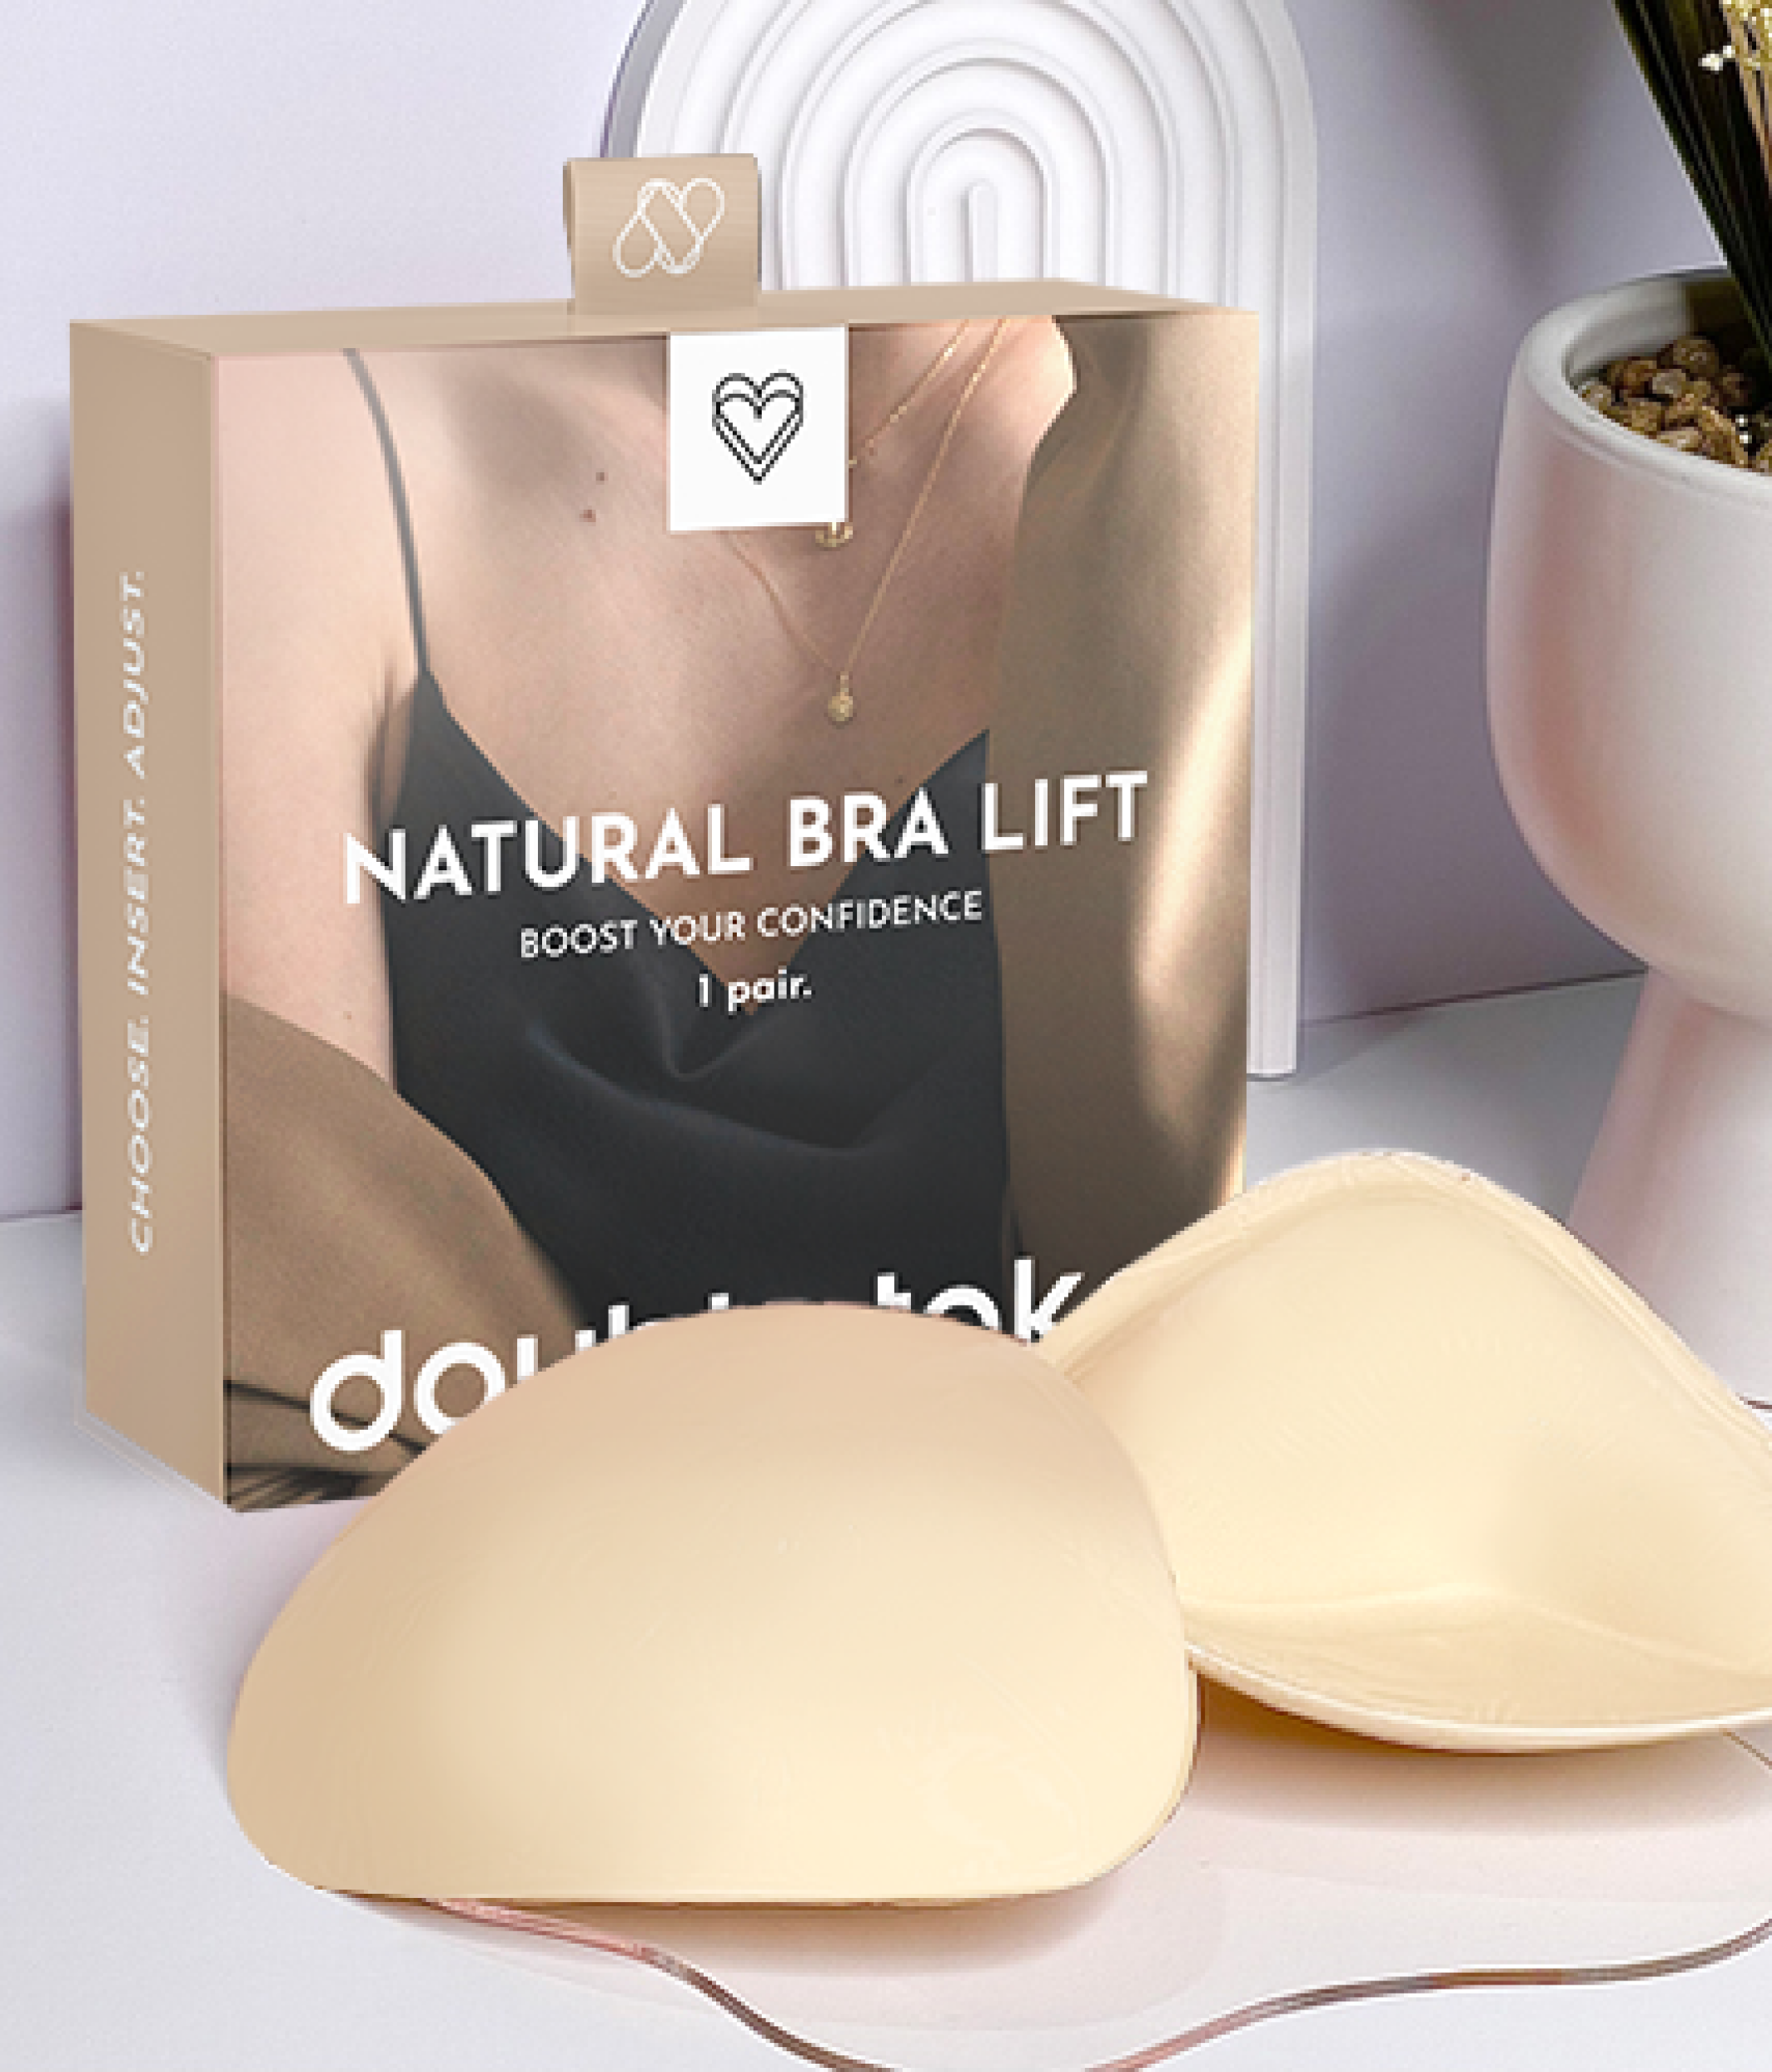 Extra Boost Inserts - Bra Enhancers That Upgrade Your Cup Size